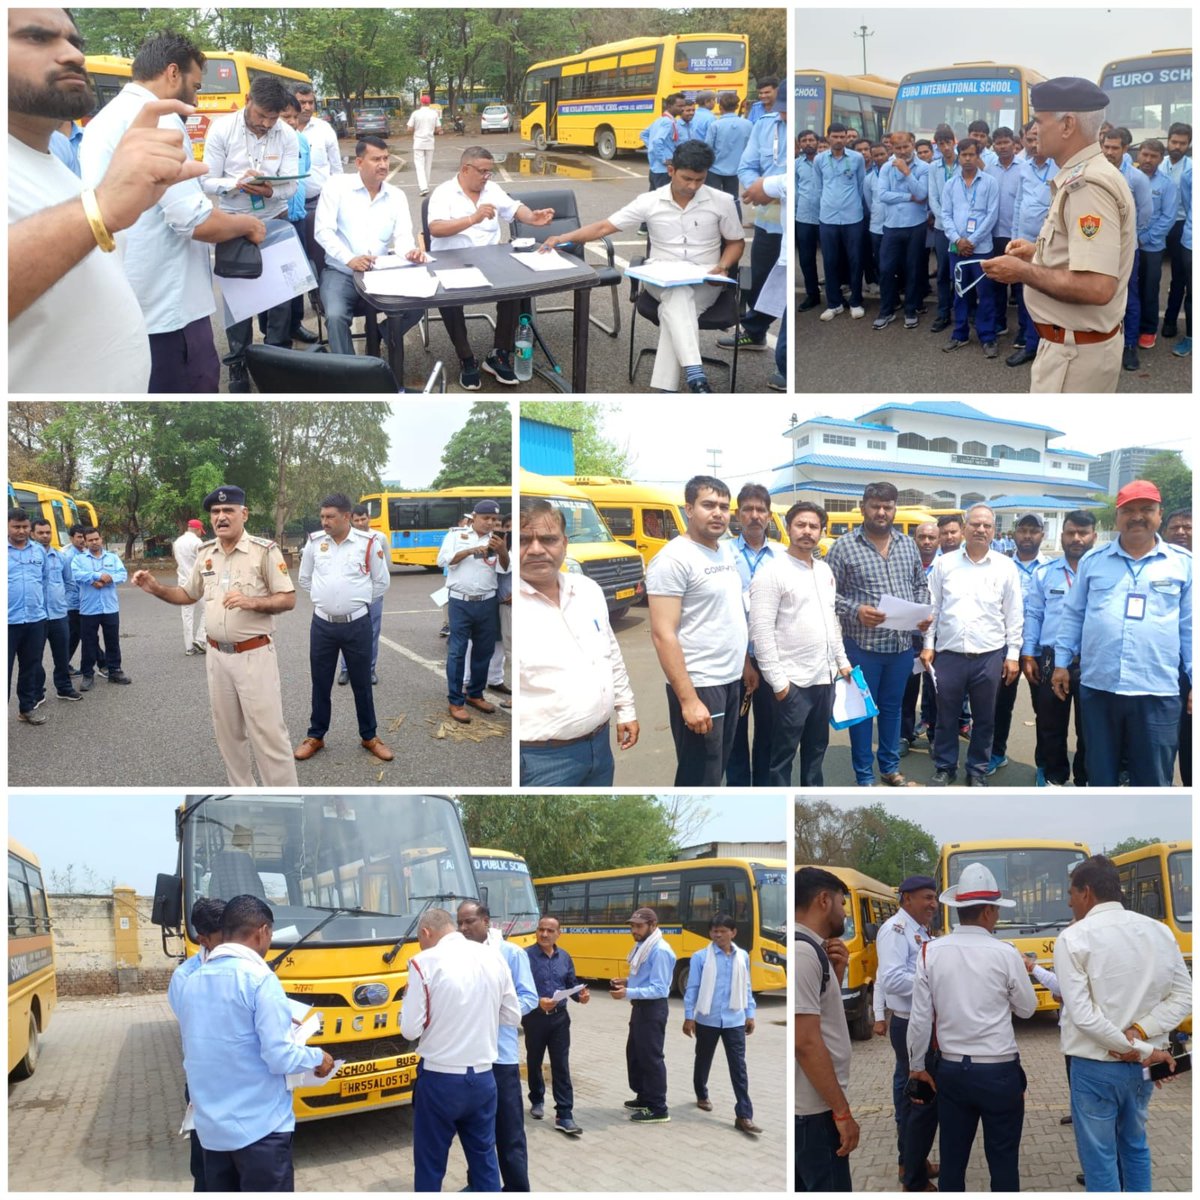 1260 school buses inspected, 406 fined. Three buses impounded. No defective school bus will be allowed to operate - Deputy Commissioner Shri Nishant Kumar Yadav. Under the supervision of Deputy Commissioner Shri Nishant Kumar Yadav and Police Commissioner Vikas Arora, the…